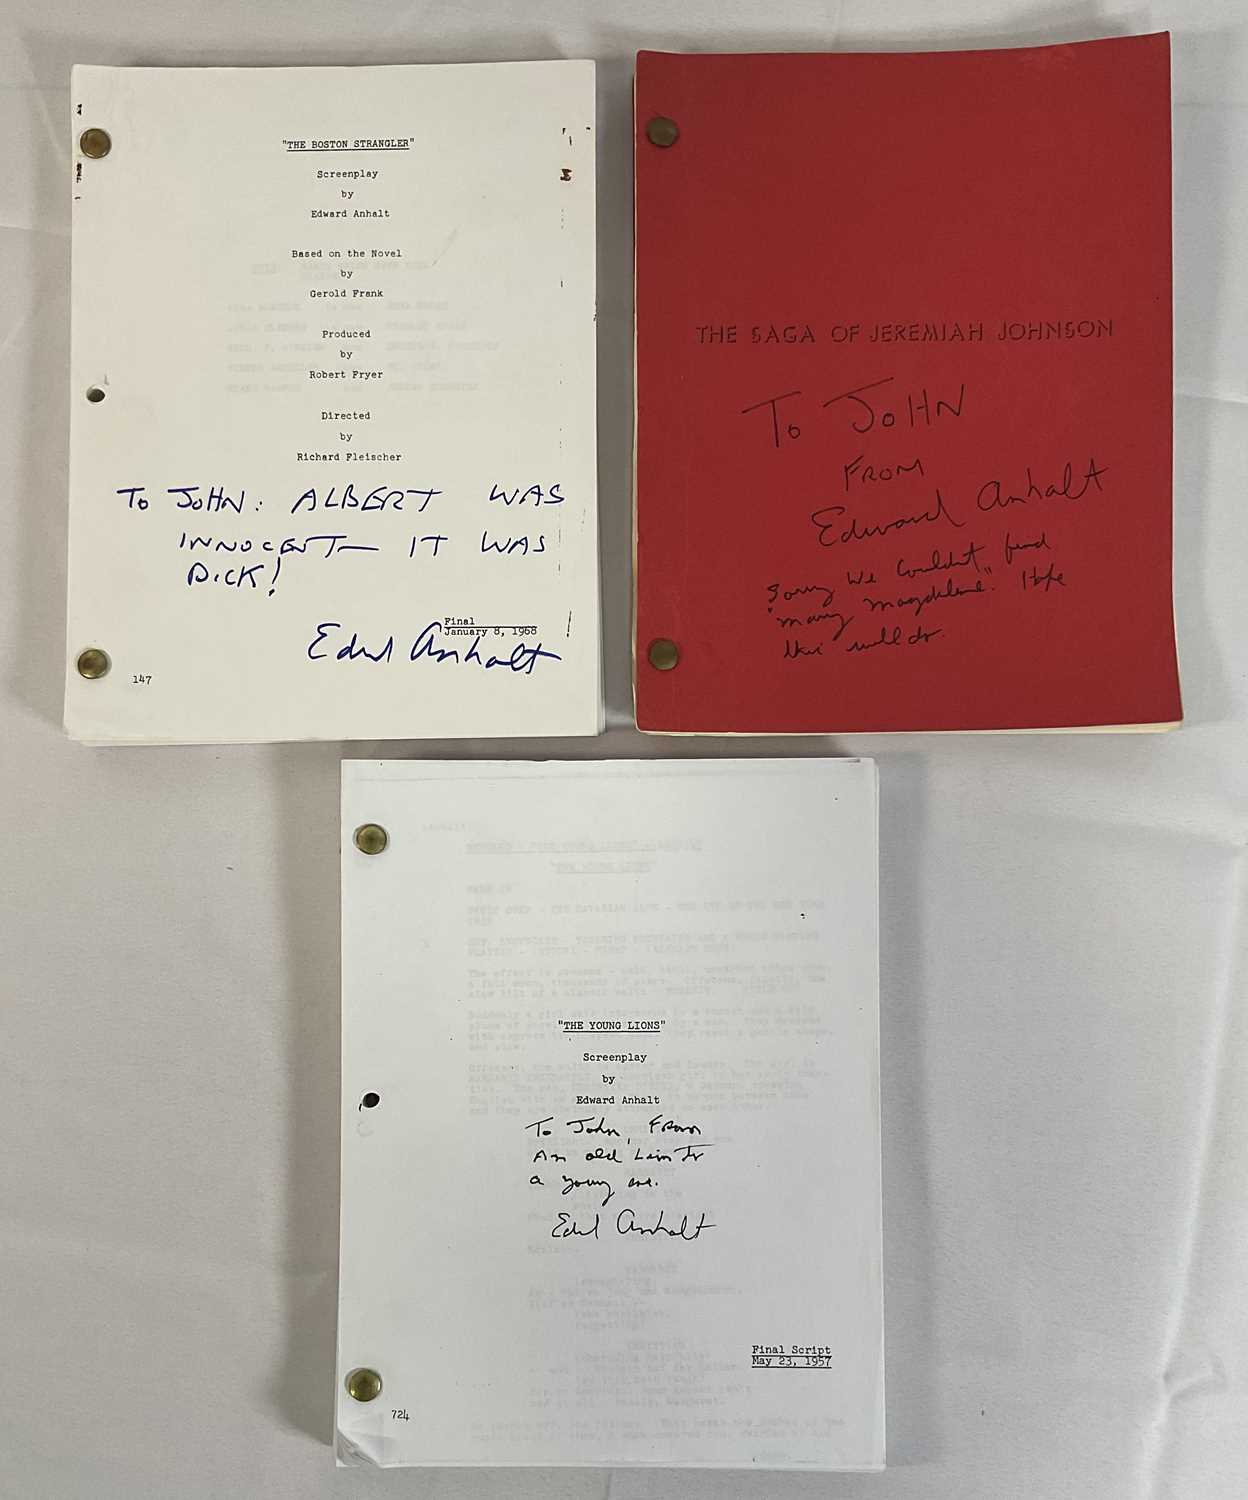 A group of autographed screenplays signed by writer EDWARD ANHALT including THE BOSTON STRANGLER (